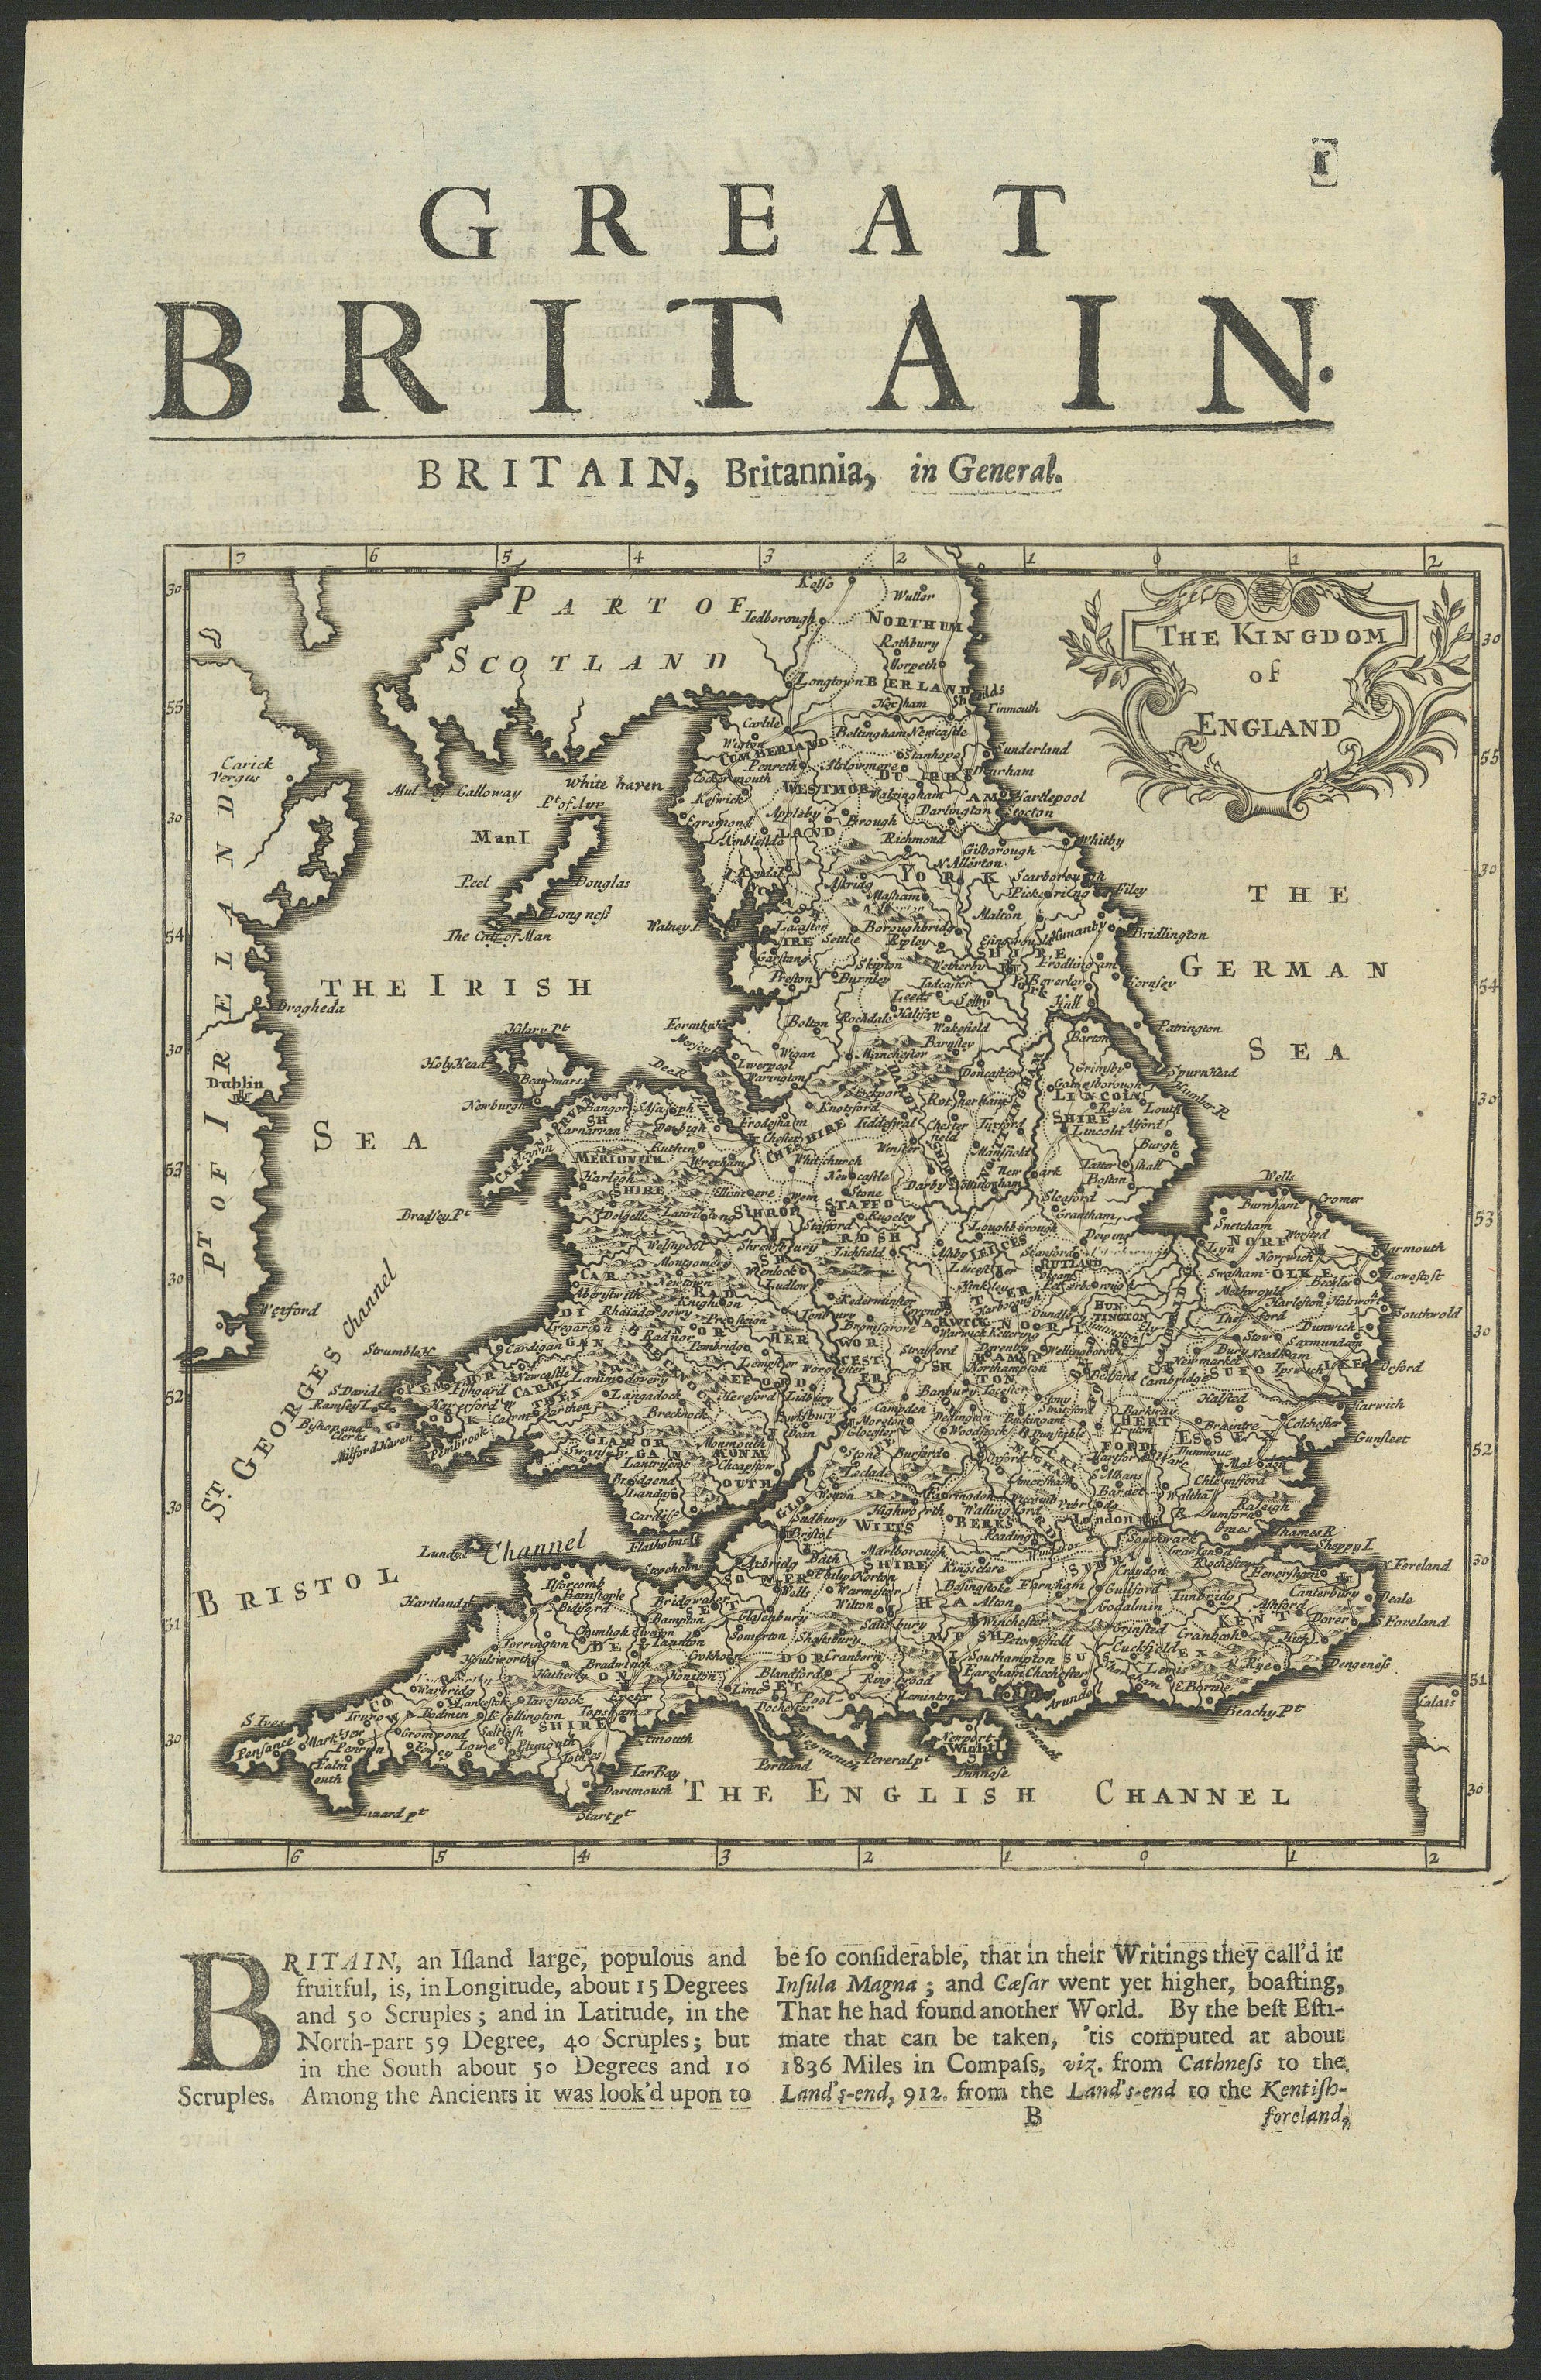 Associate Product "The Kingdom of England" with Wales by Herman Moll 1709 old antique map chart